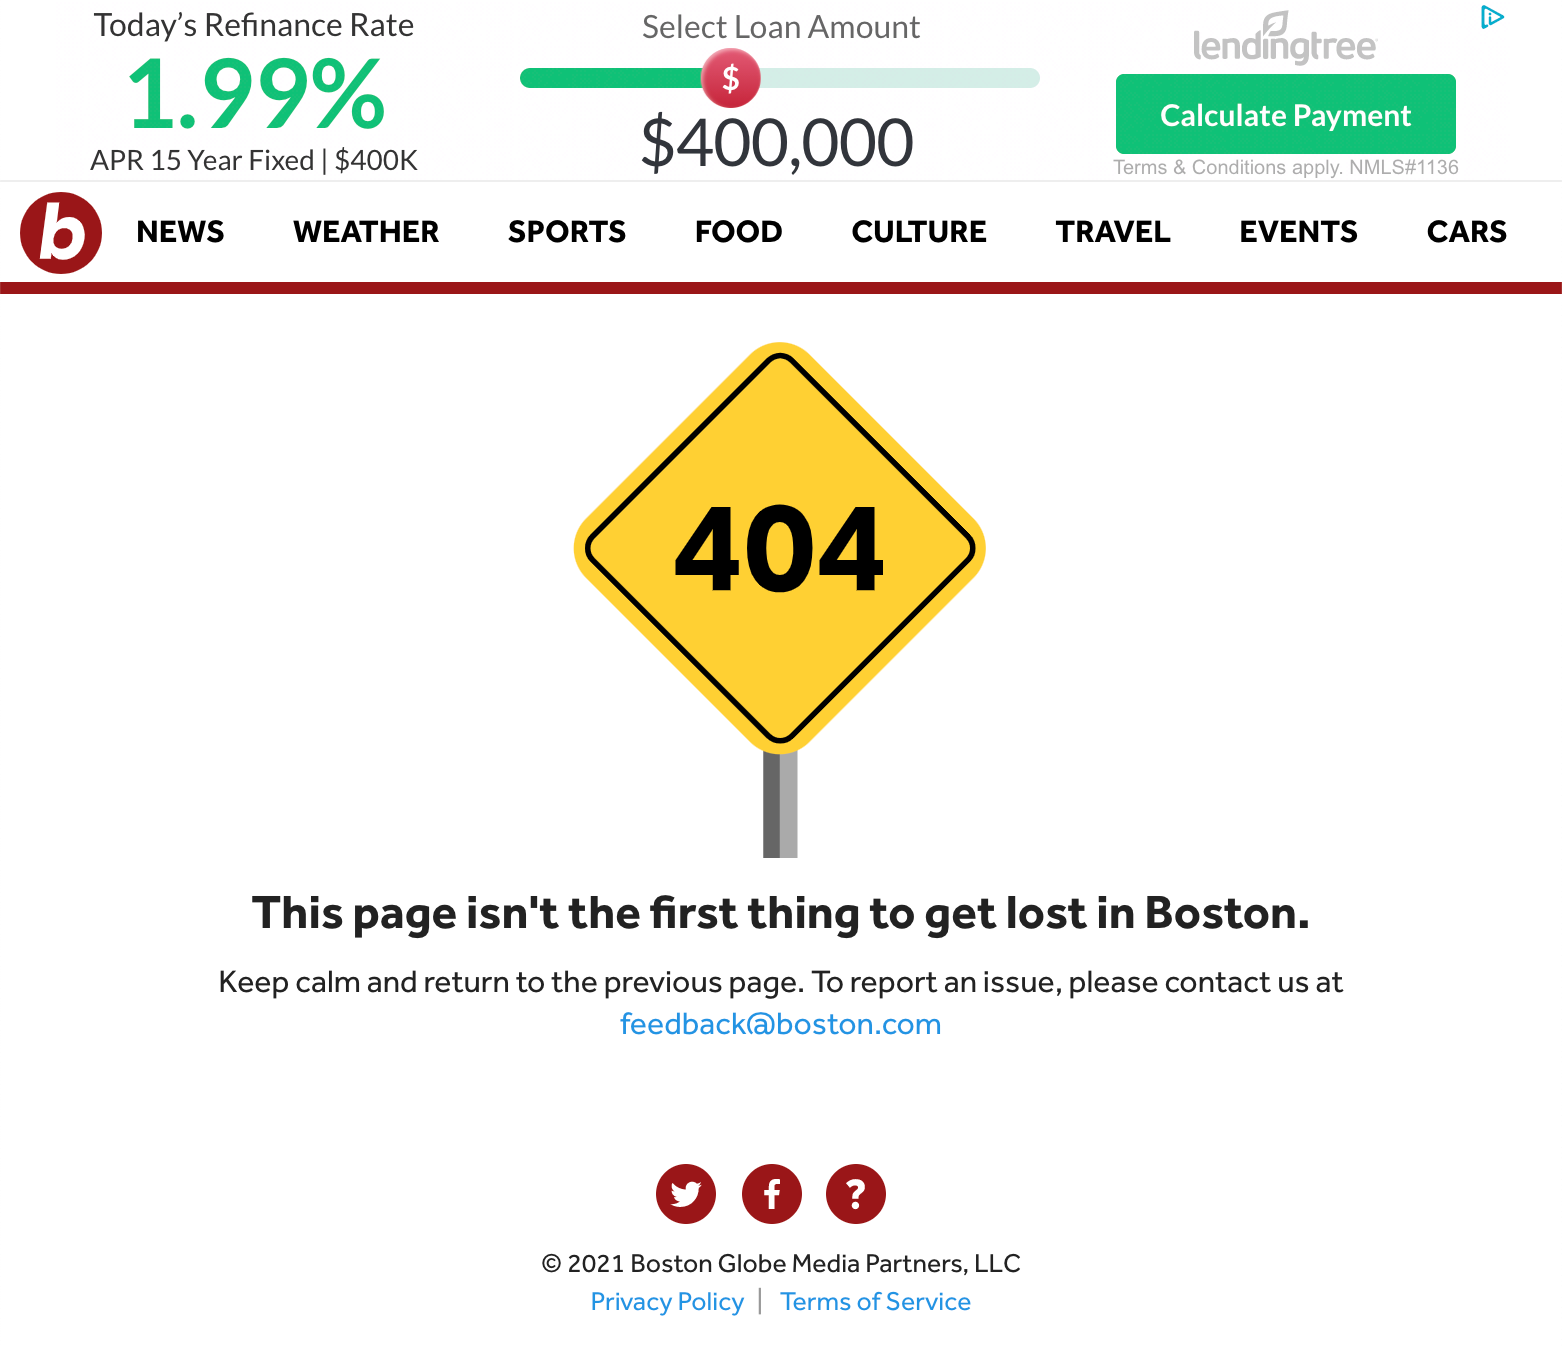 A yellow warning sign labeled “404”. This page isn't the first thing to get lost in Boston. Keep calm and return to the previous page. To report an issue, please contact us at feedback@boston.com. Screenshot.